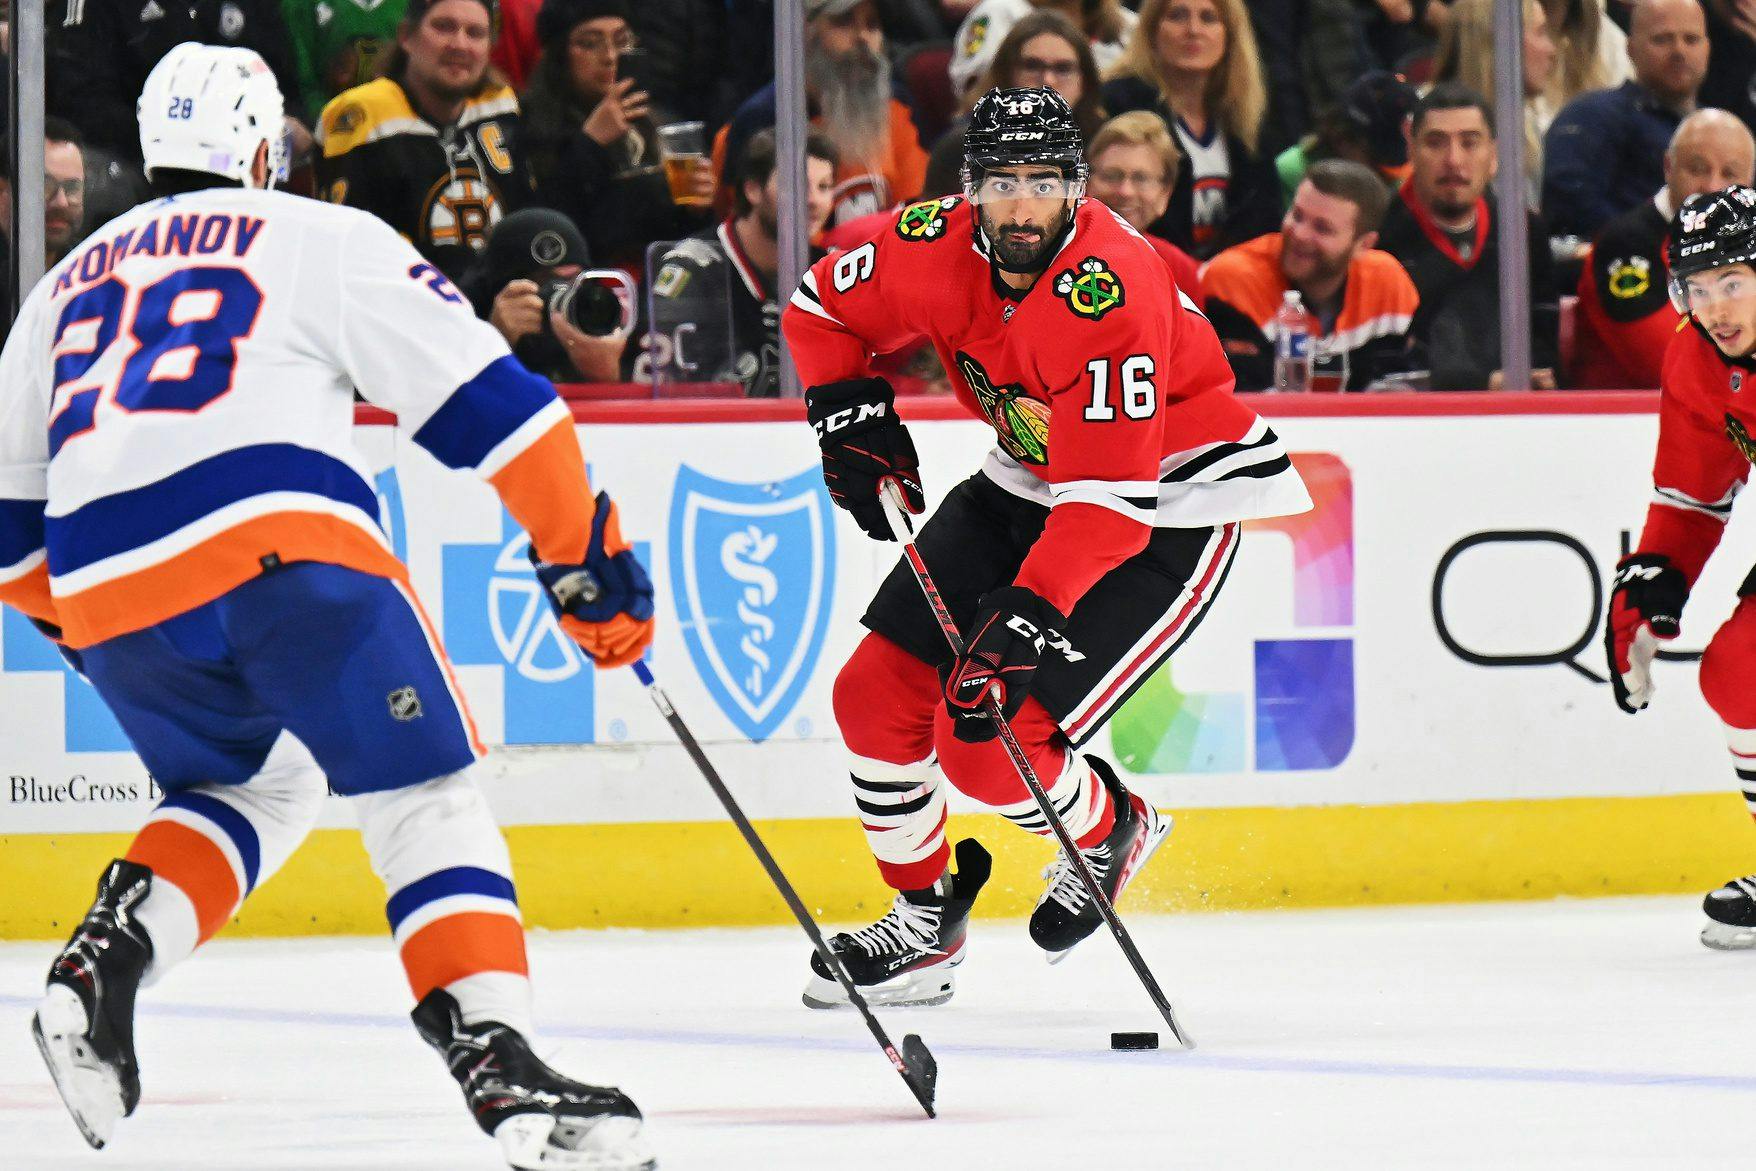 Forward Jujhar Khaira signs two-year contract with the Chicago Blackhawks